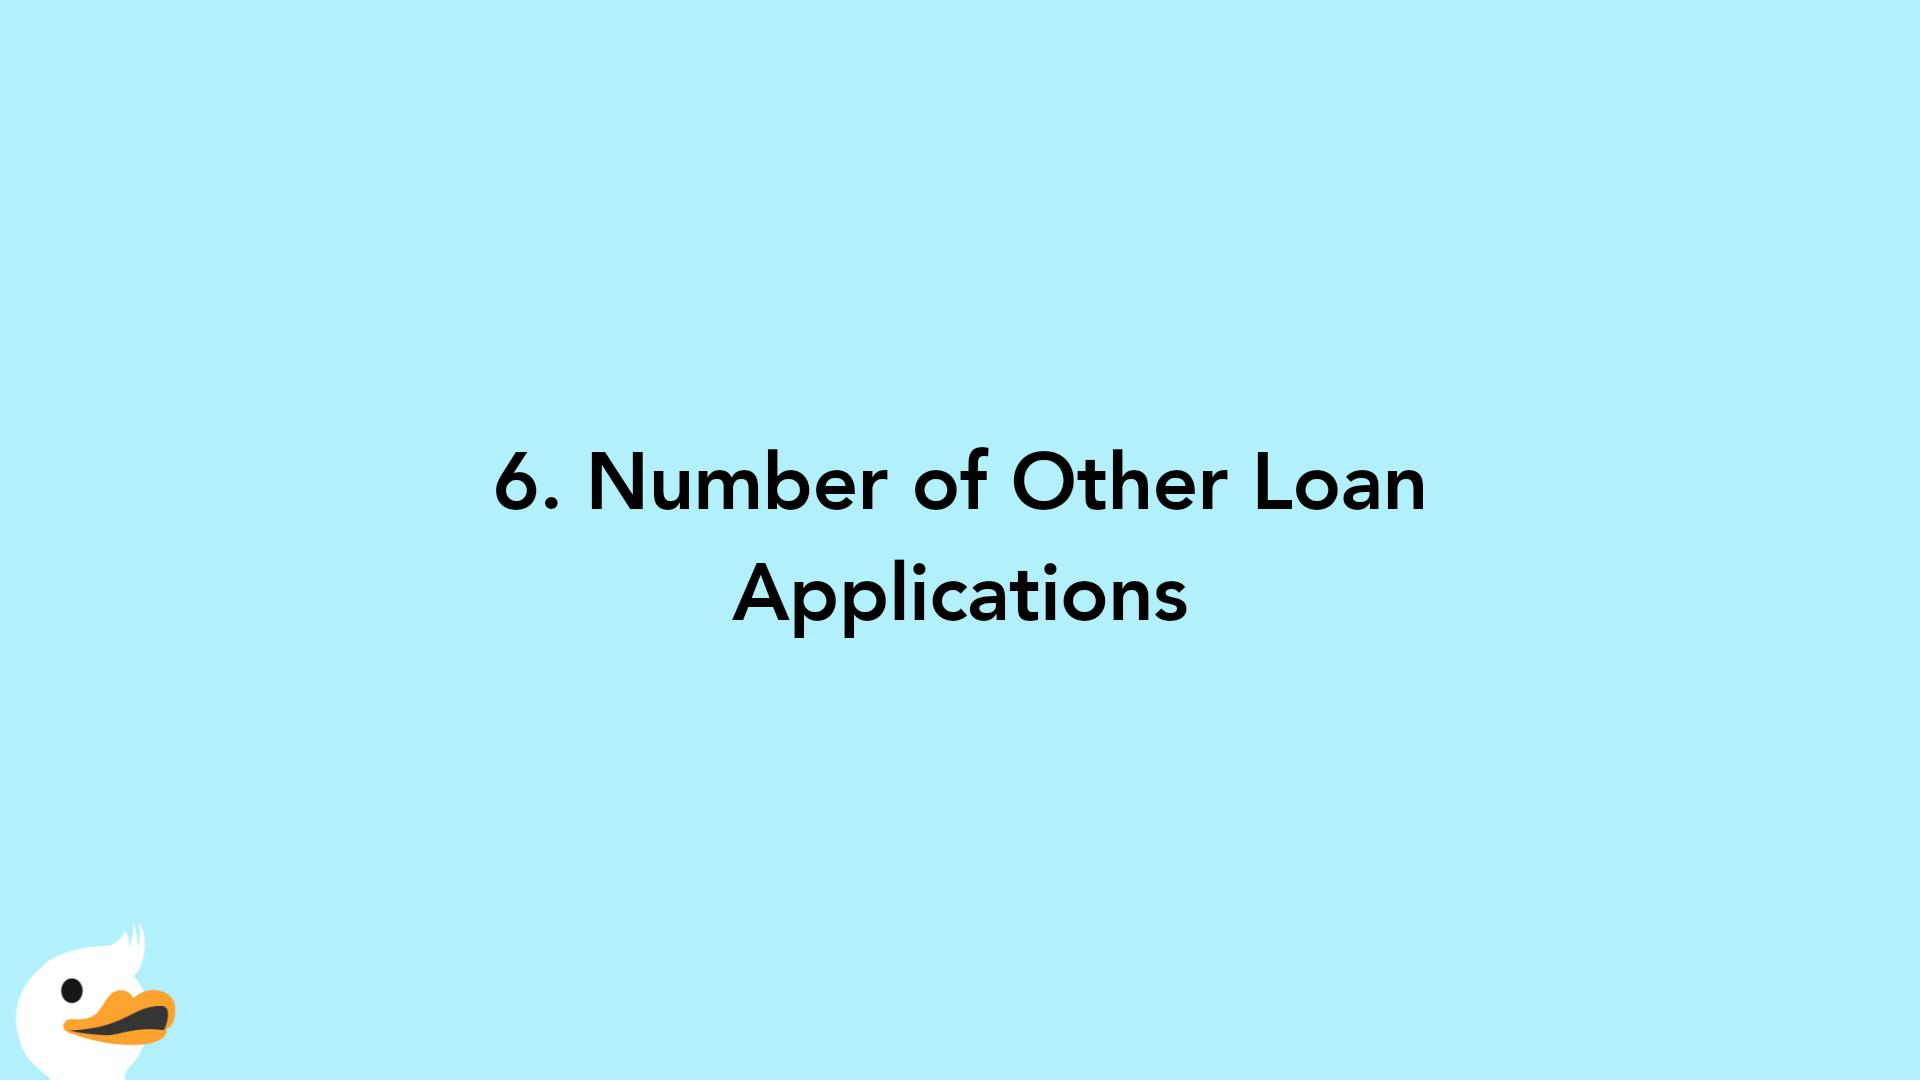 6. Number of Other Loan Applications